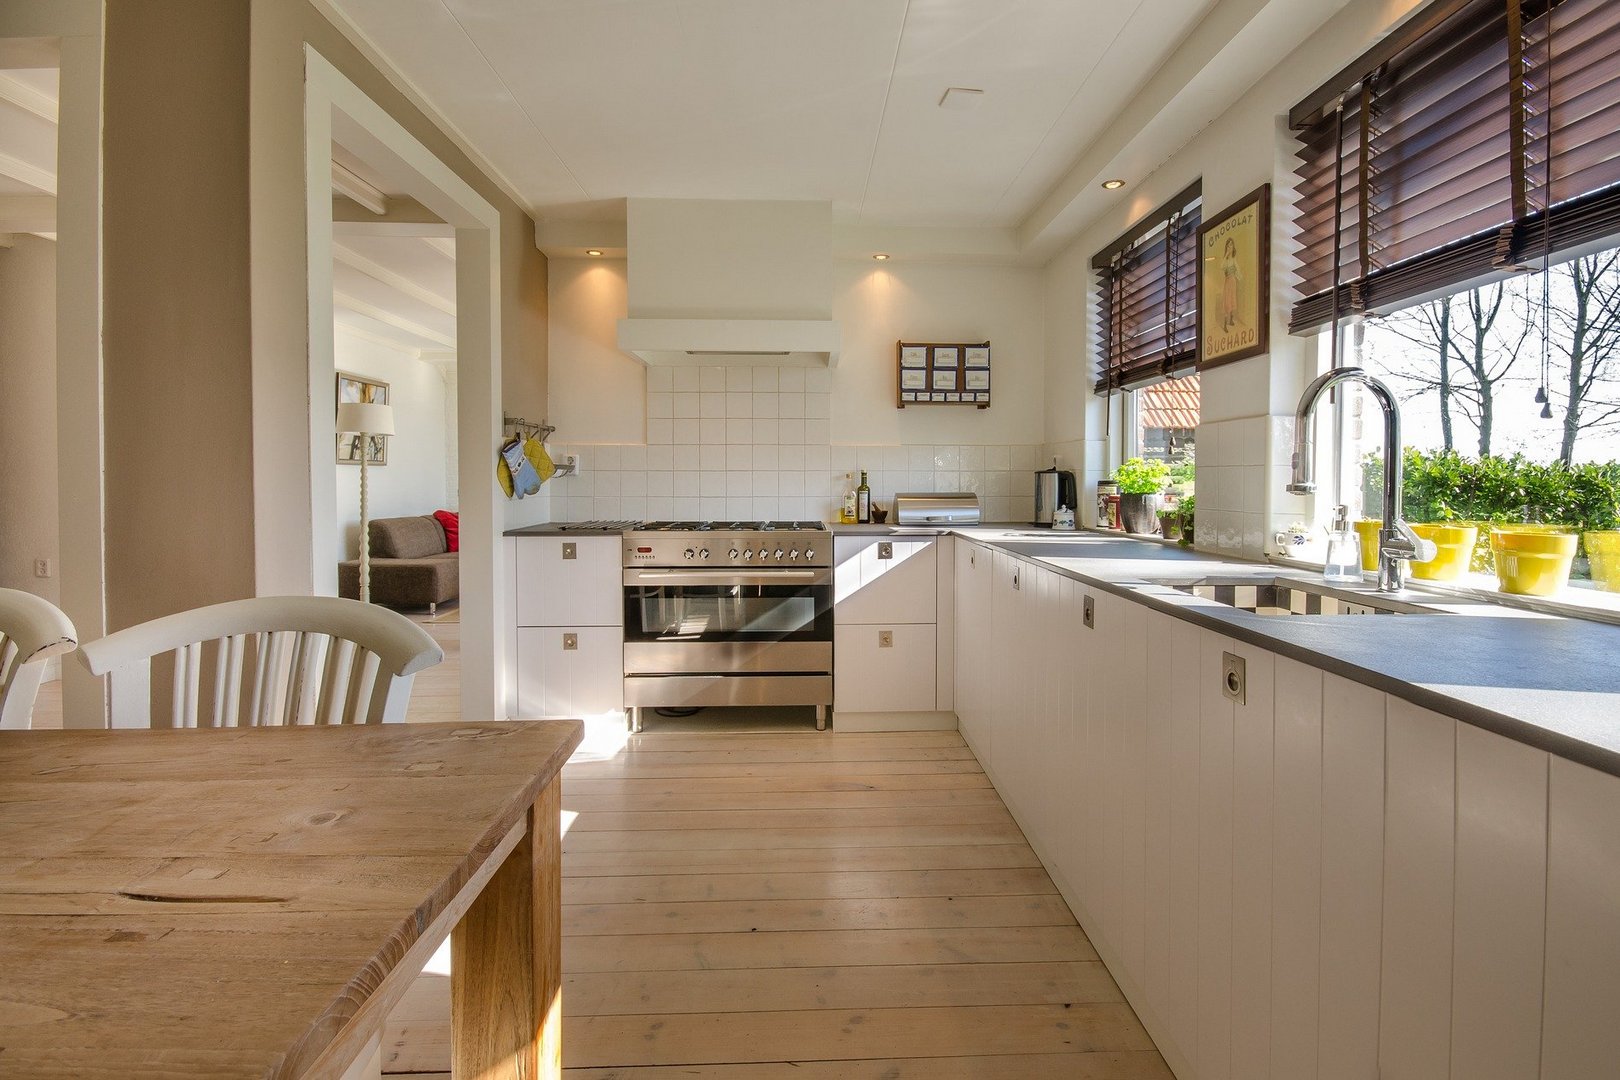 How to make your kitchen brighter